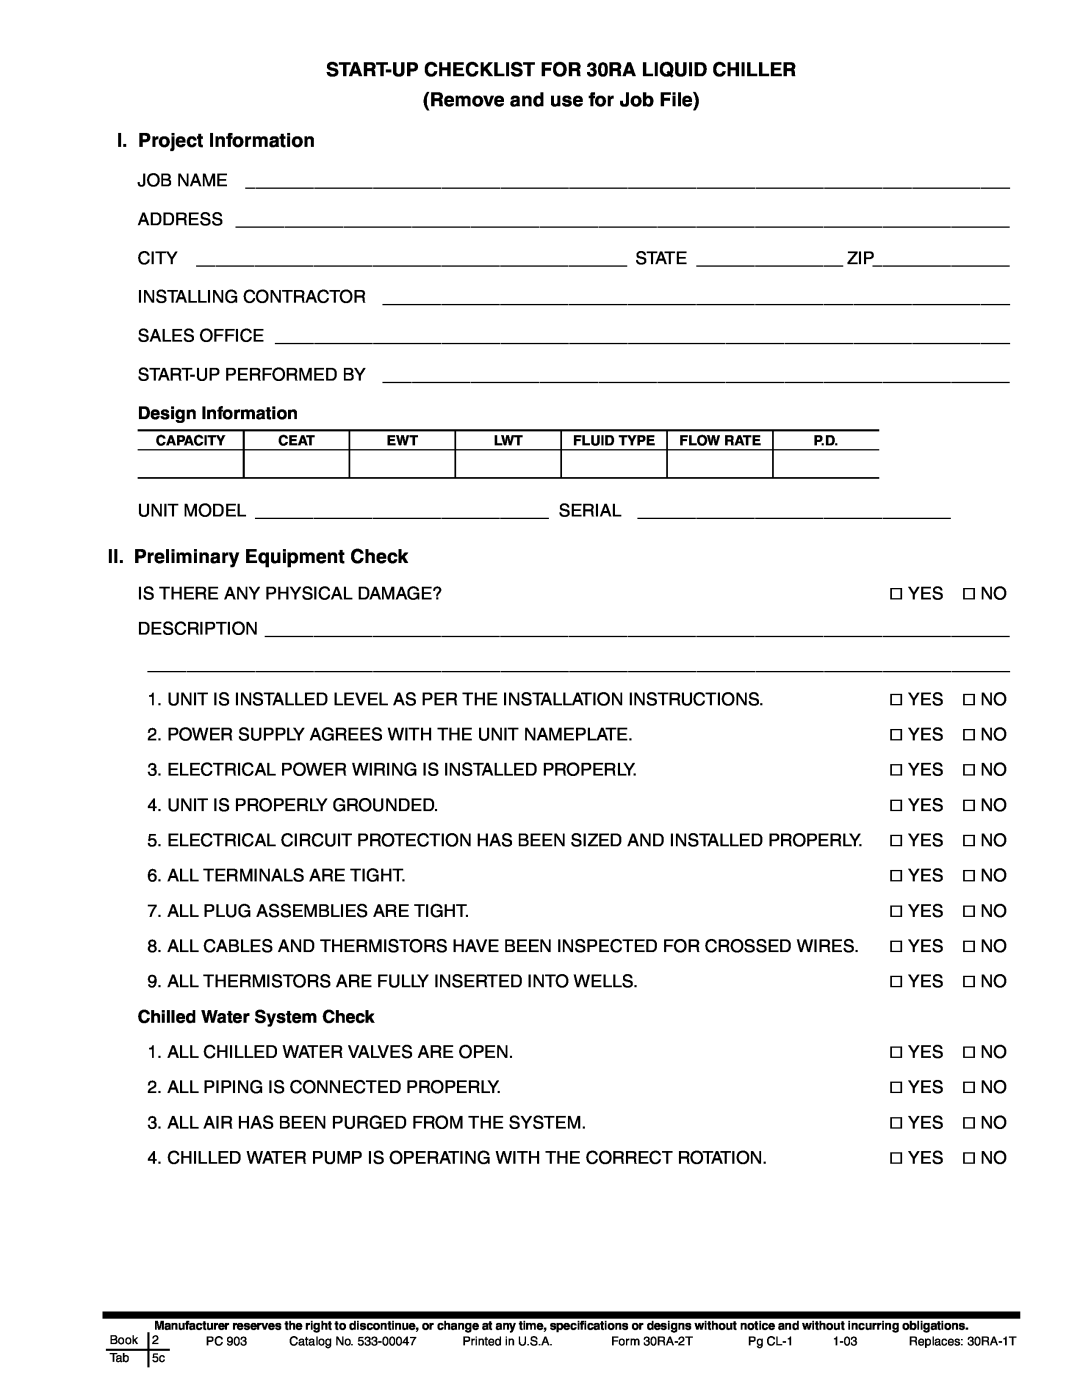 Sterling 30RA010-055 manual START-UPCHECKLIST FOR 30RA LIQUID CHILLER, Remove and use for Job File I.Project Information 